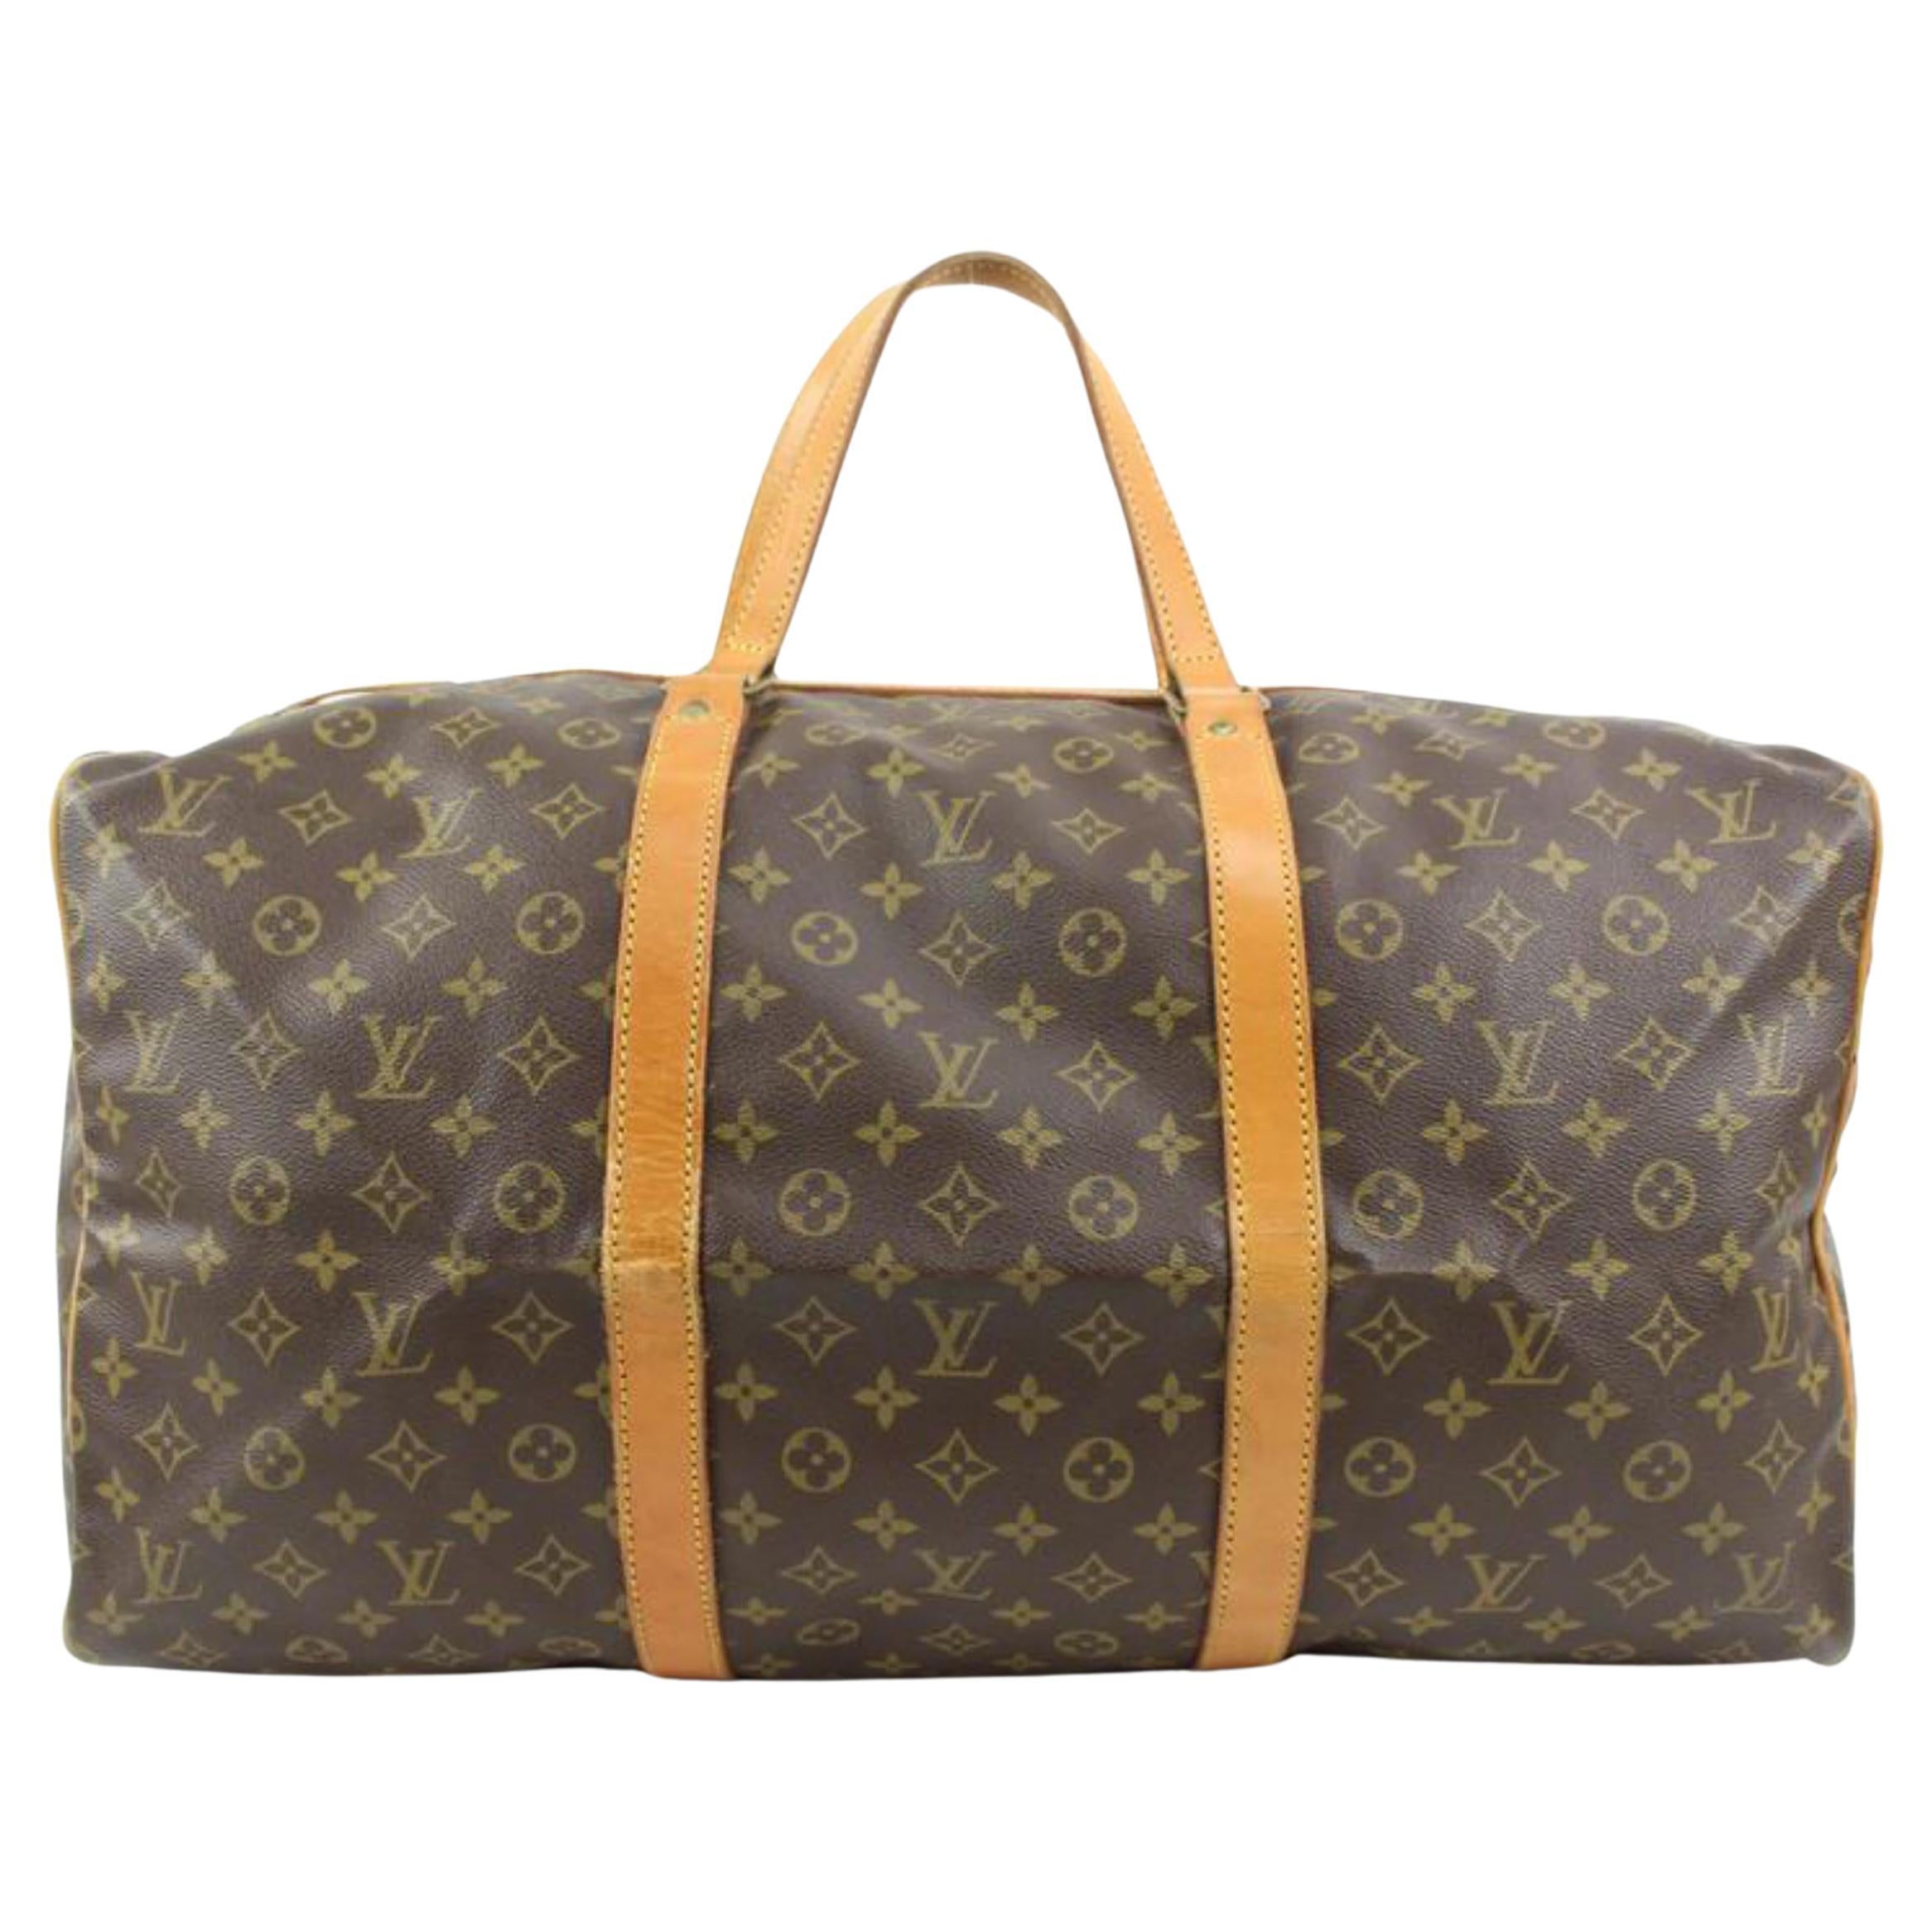 Best or worst hobo style bag from Louis Vuitton? Louis Vuitton Metis Hobo  Review 